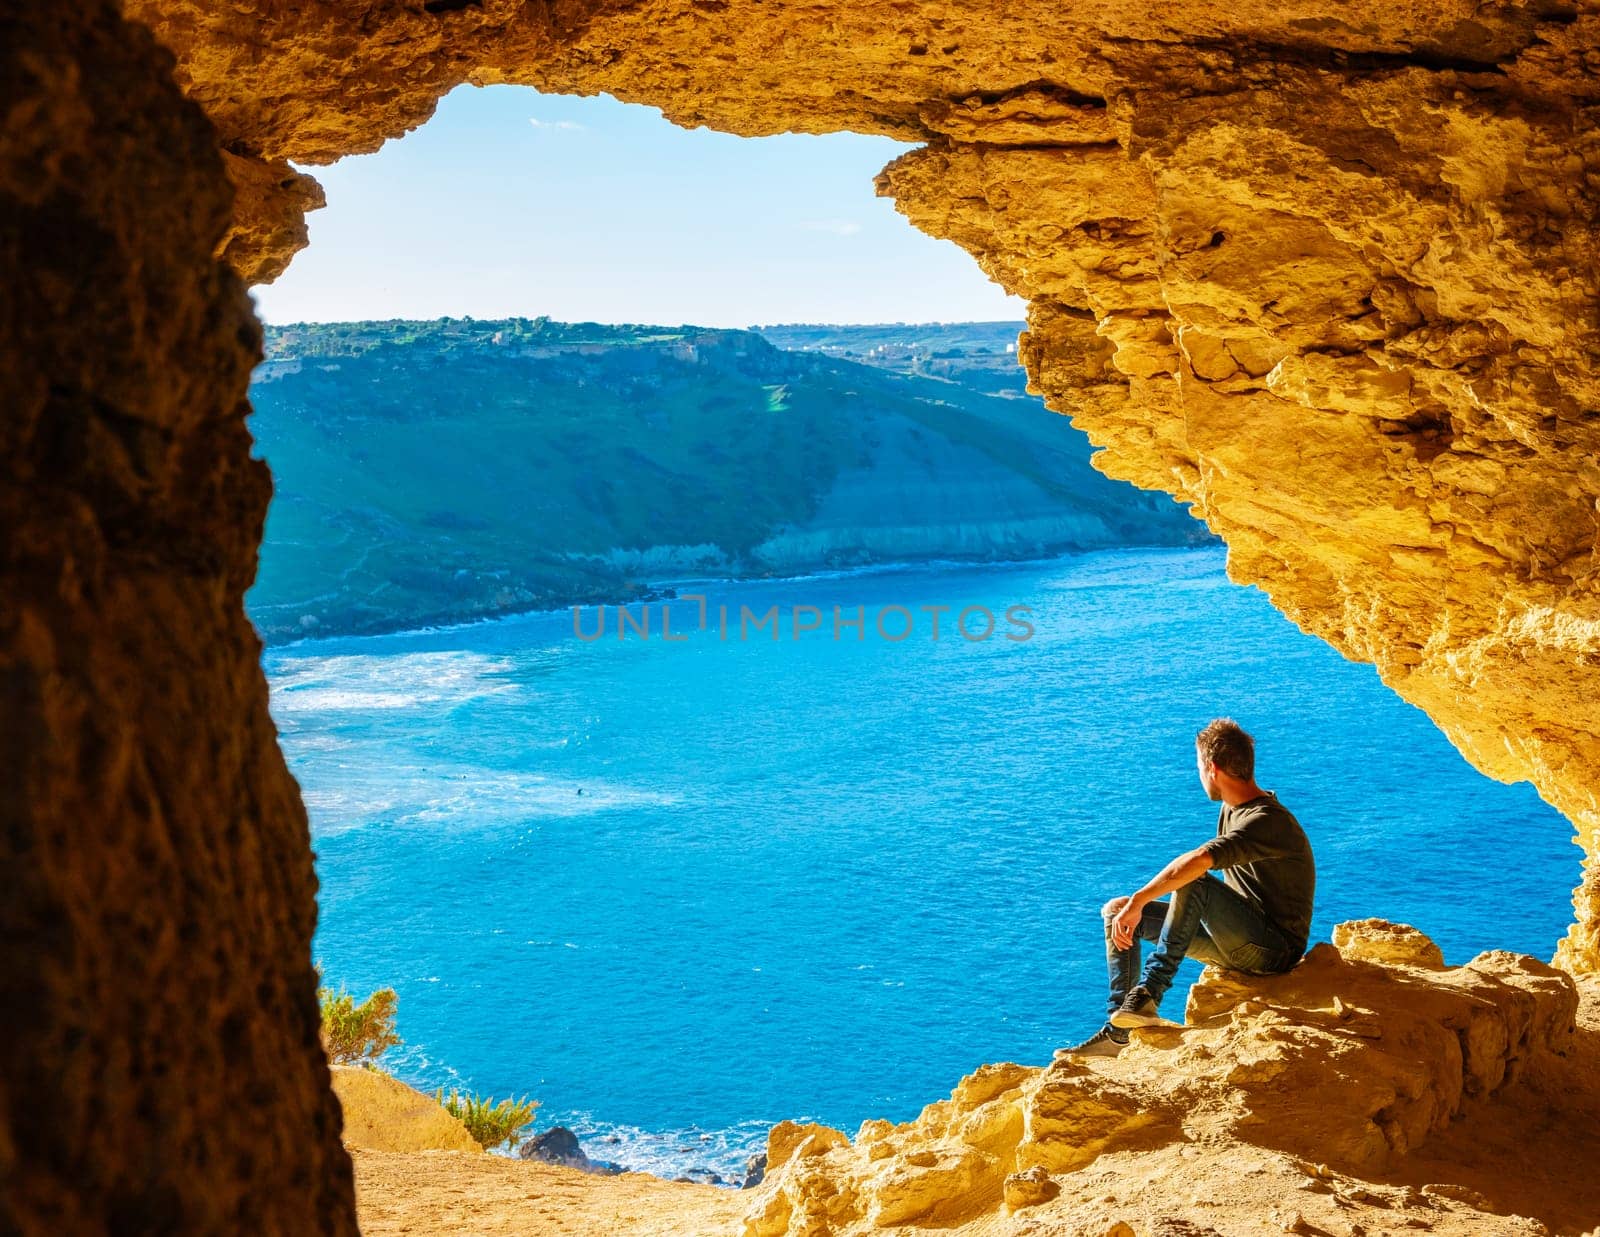 Gozo Island Malta, a young men and a View of Ramla Bay, from inside Tal Mixta Cave Gozo looking out over the blue ocean on a bright day during winter in Malta